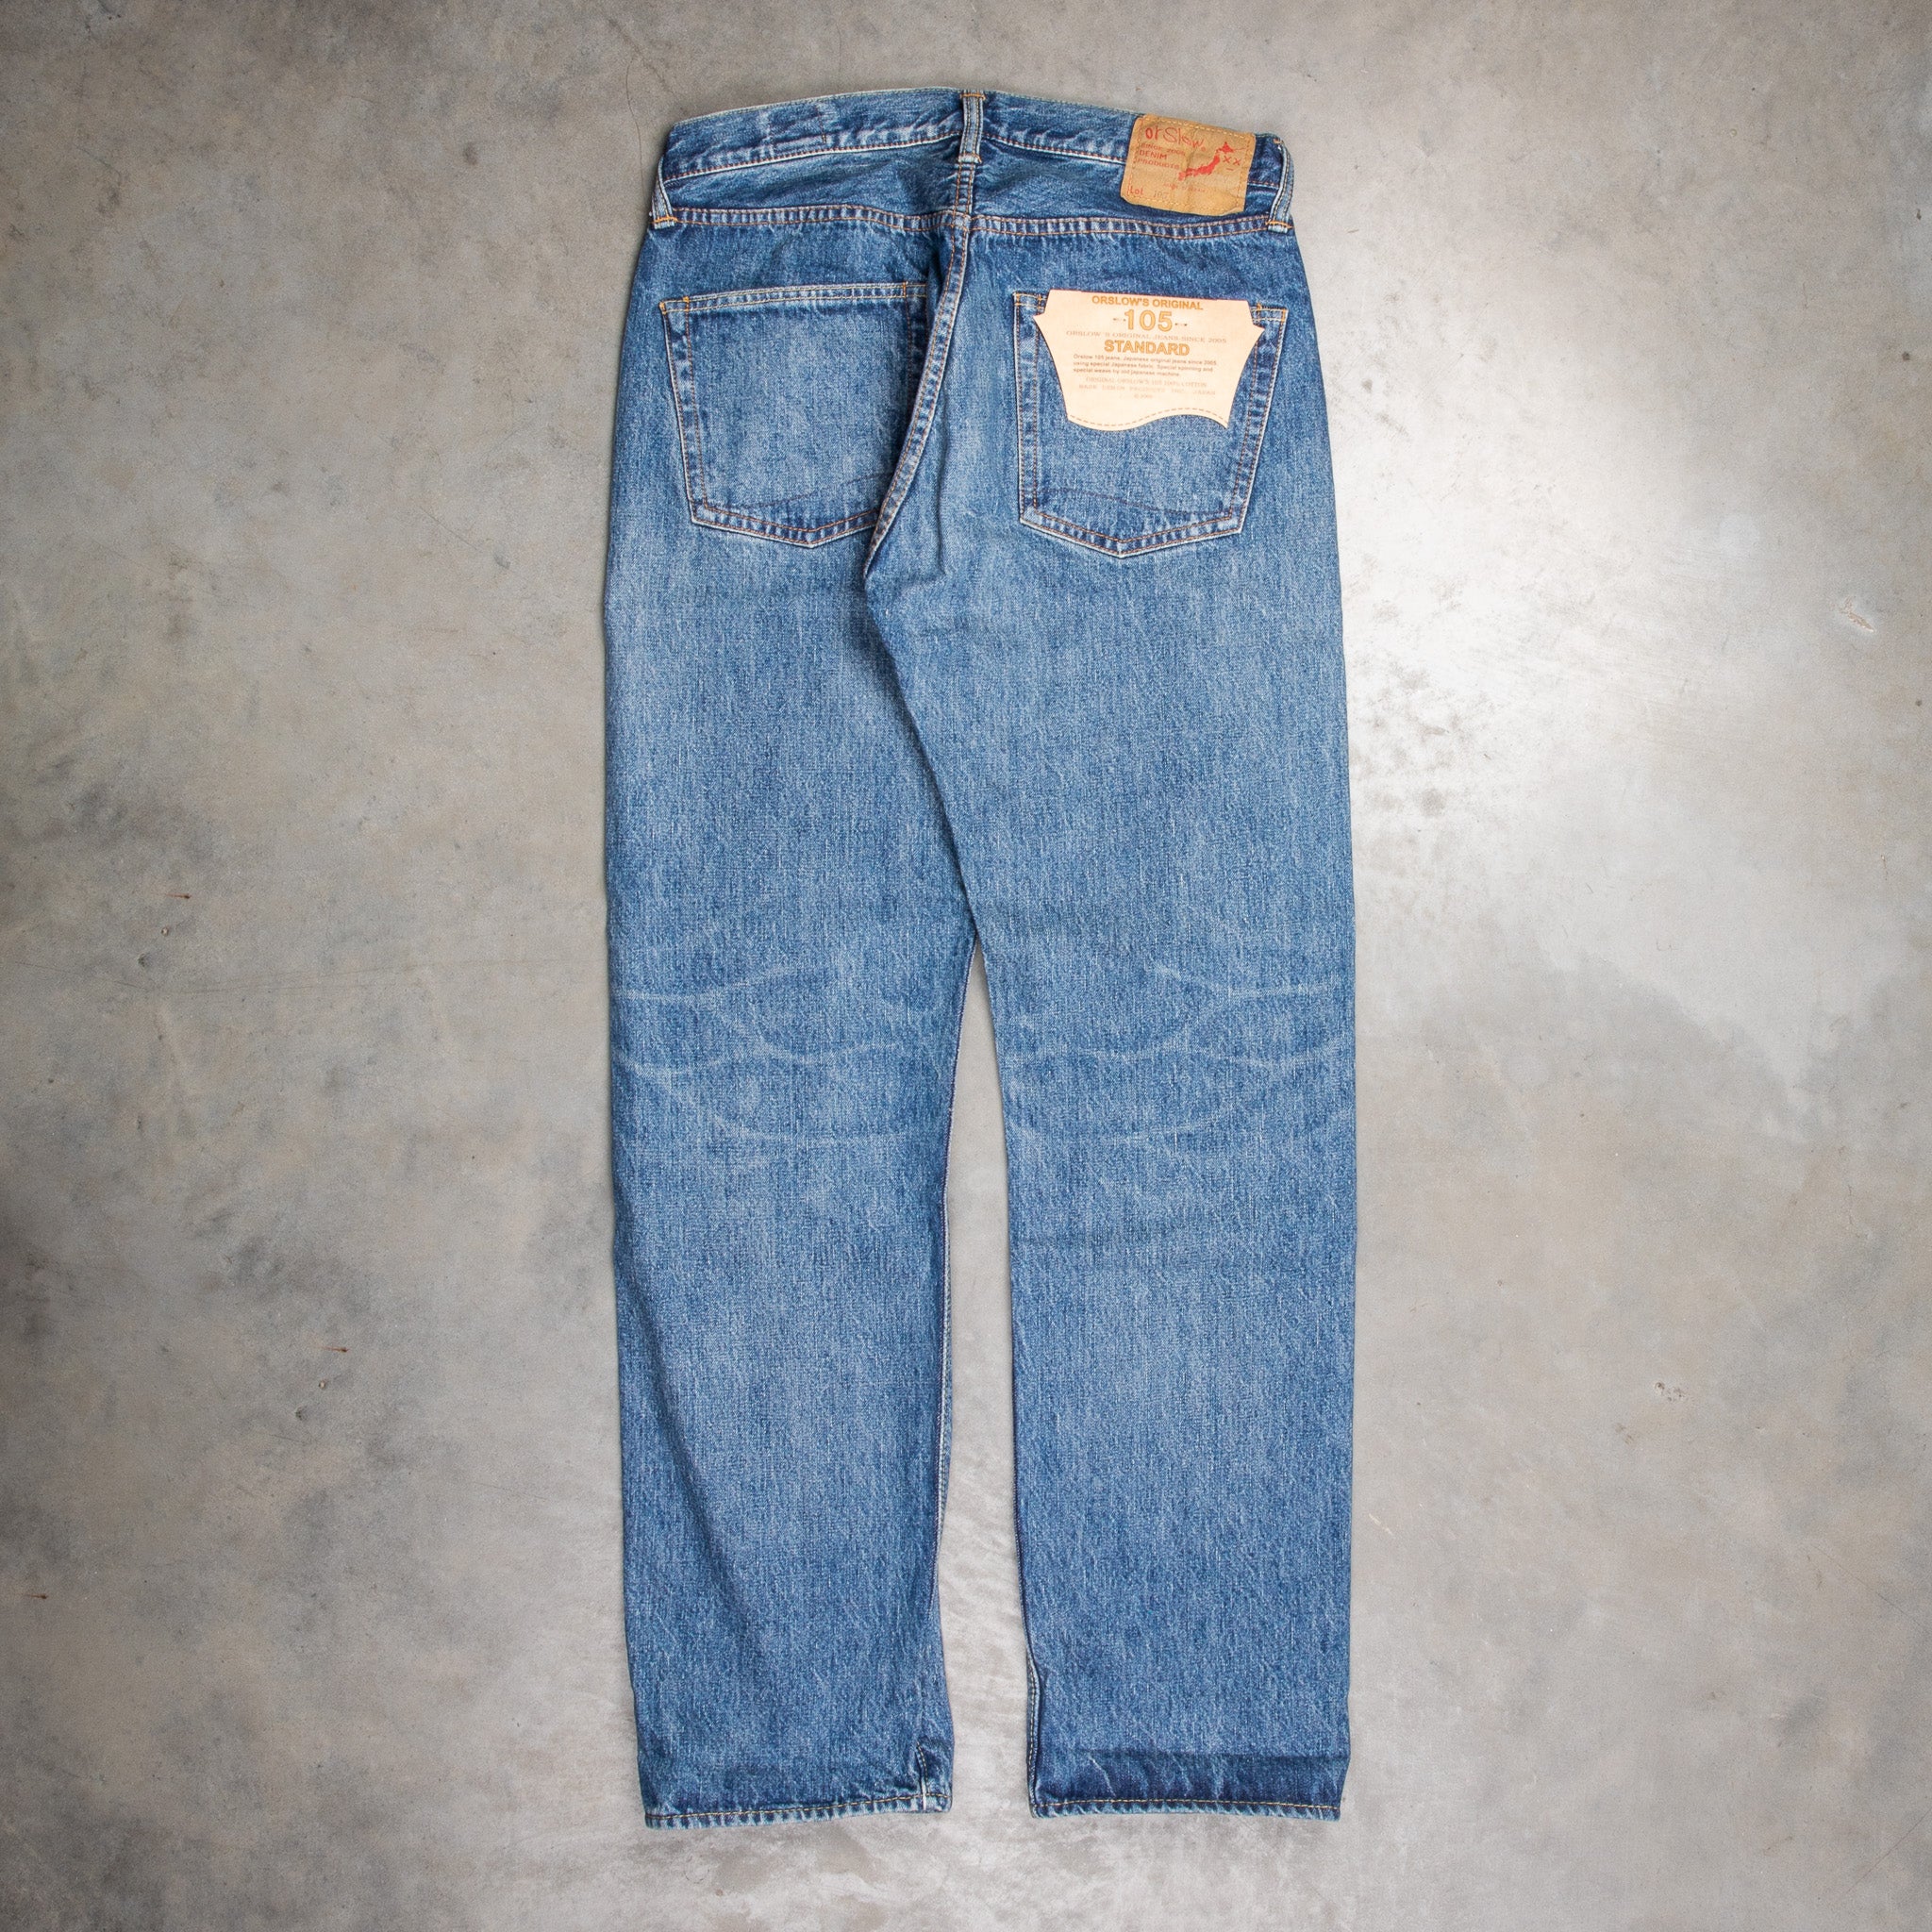 OrSlow 105 Standard Fit 2 Year Wash